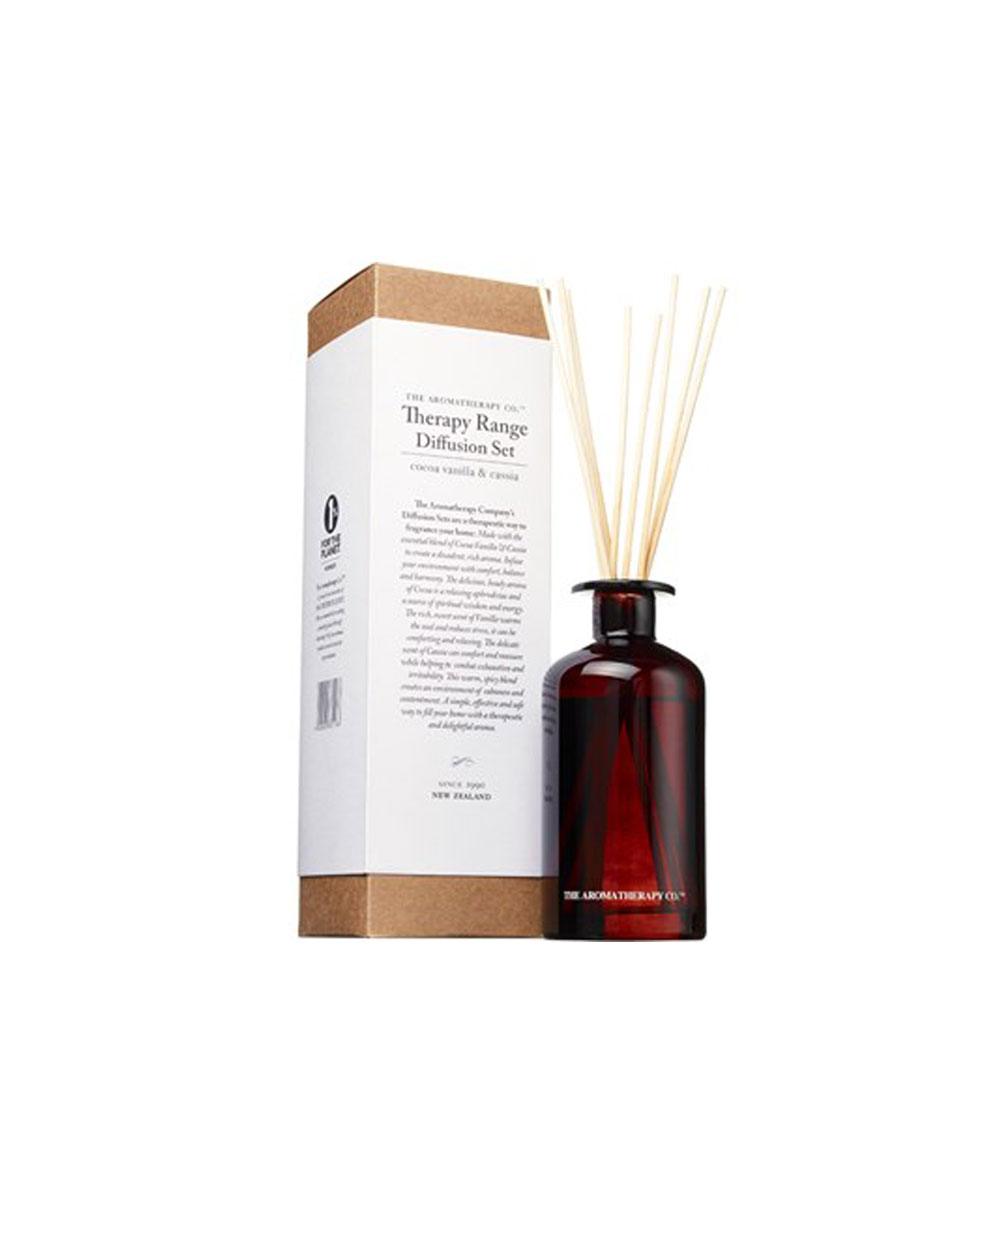 Coco-Vanilla-&-Cassis-The-aromatherapy_Wallace-cotton_$42.90